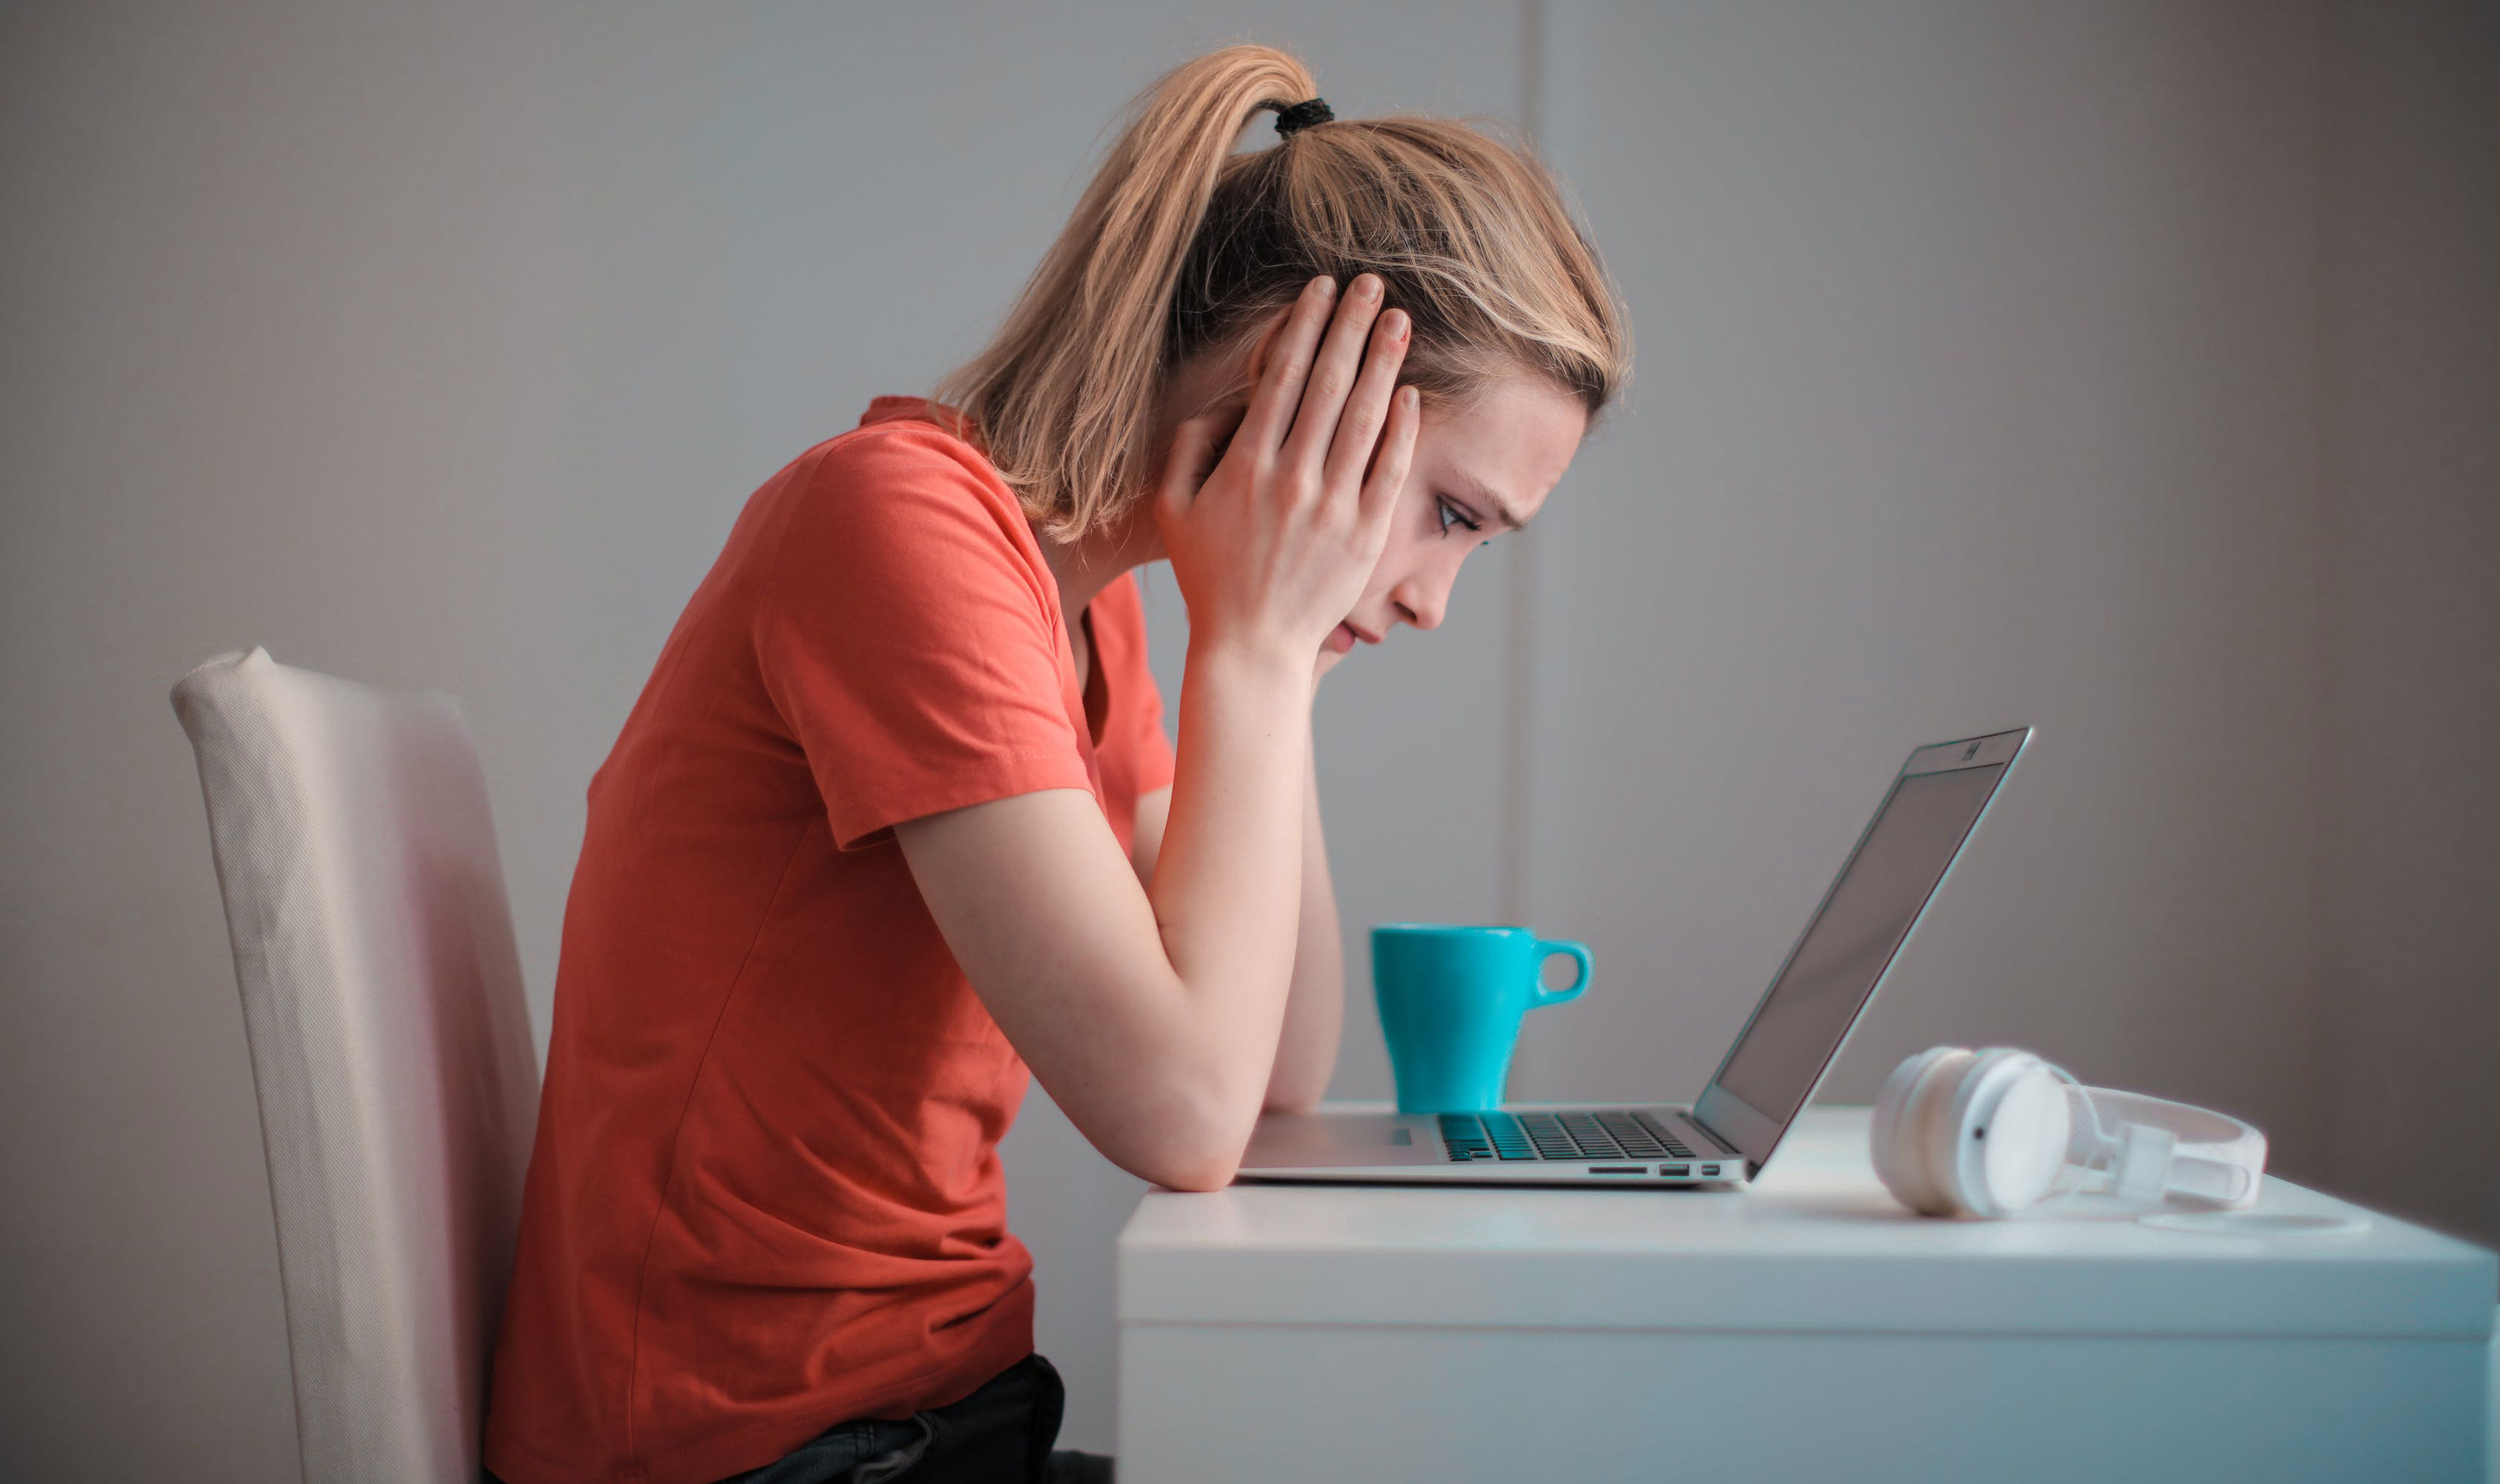 A girl is sitting at the computer searching for information about constipation.